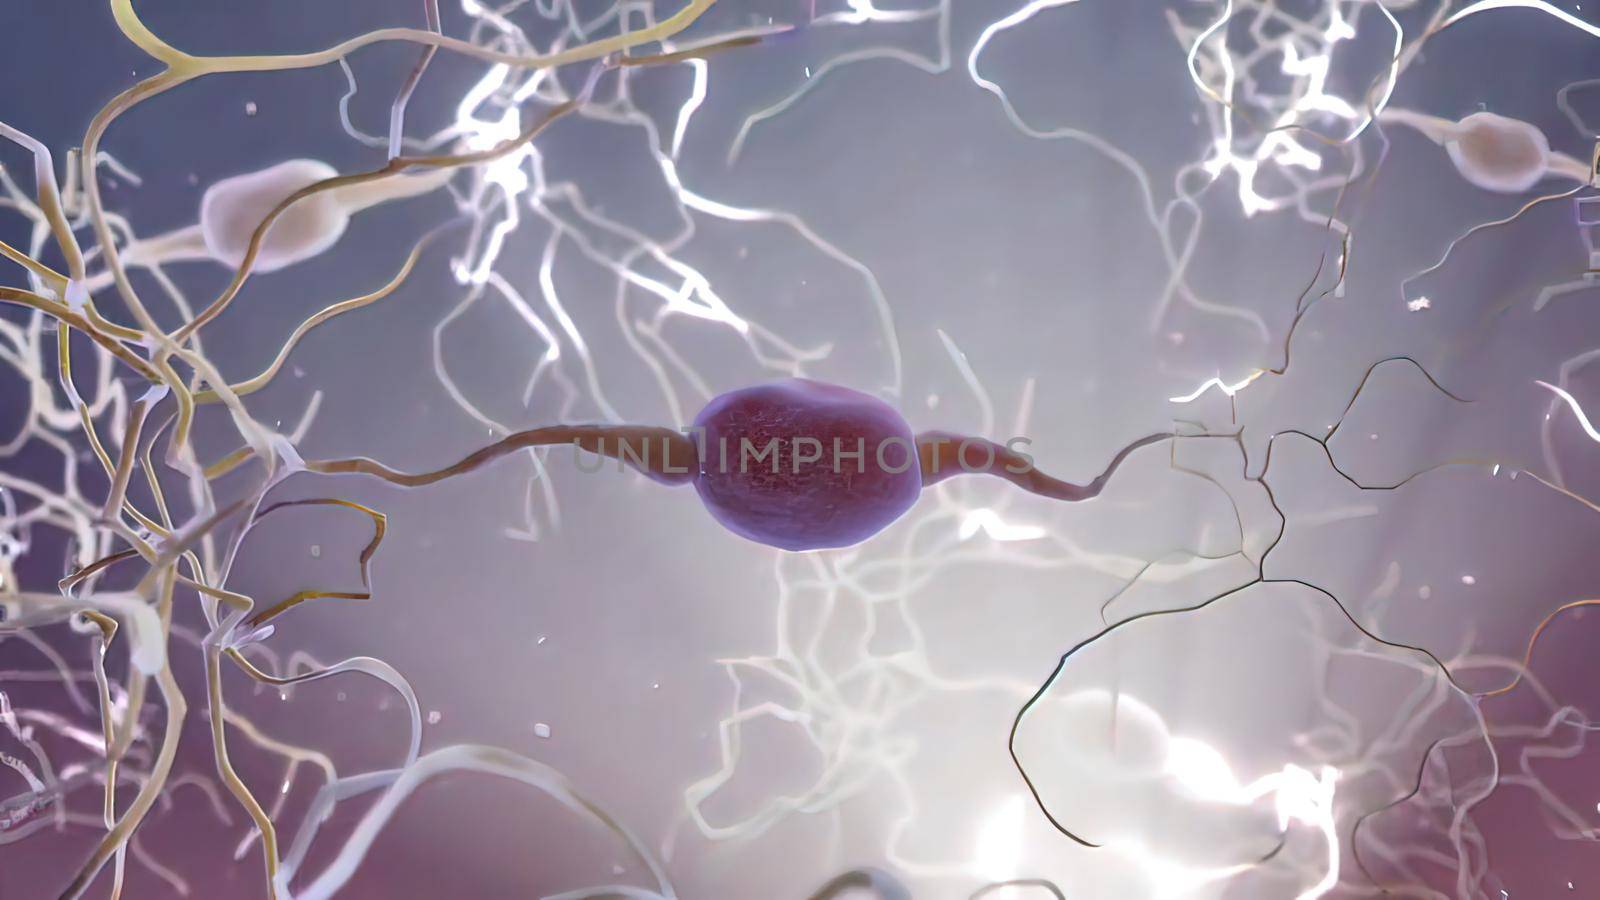 Intro Brain Impulses. Neuron System. Transferring Pulses And Generating by creativepic